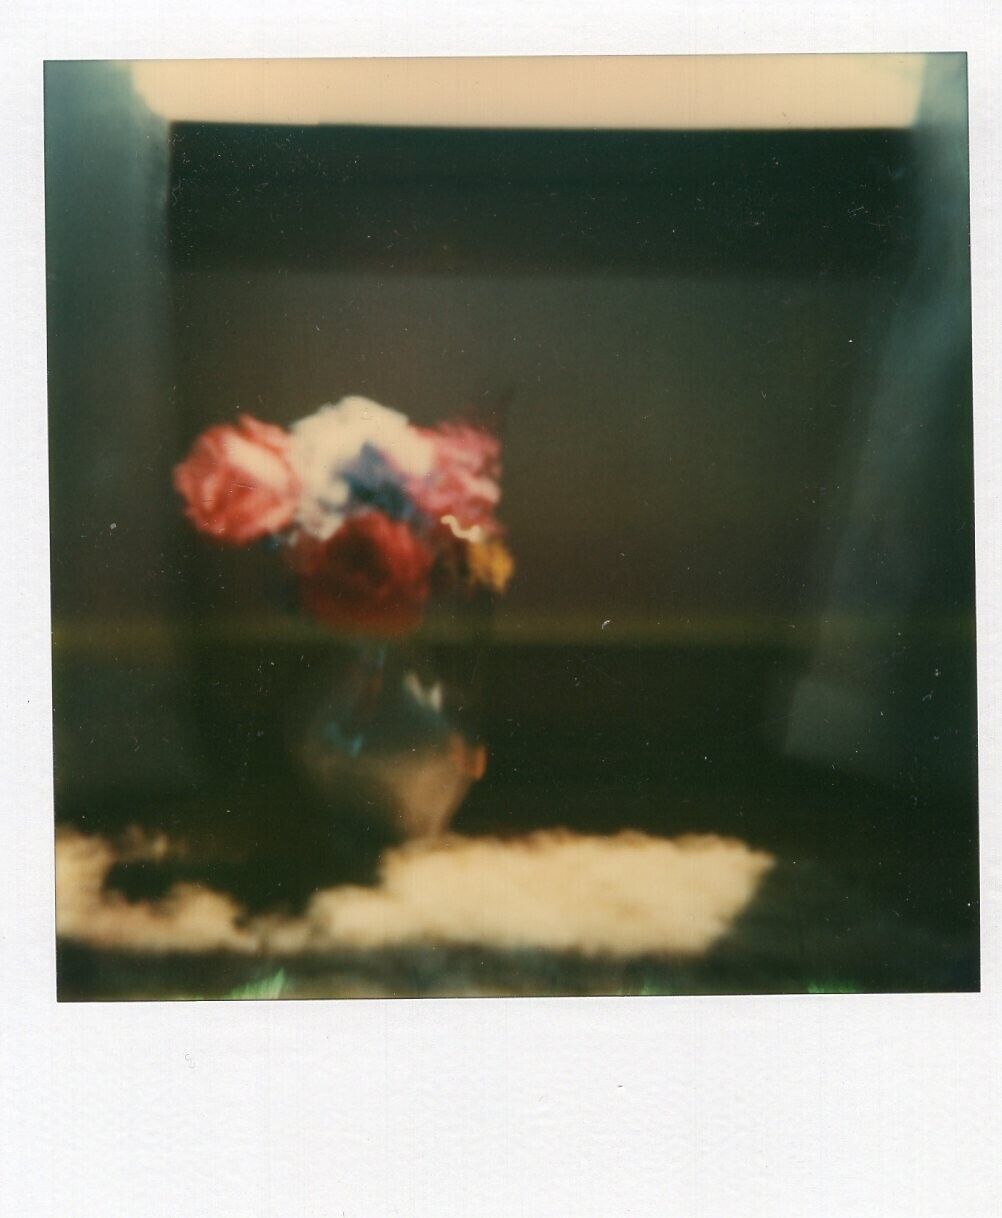 VINTAGE POLAROID PHOTO ODDITY ABSTRACT FLOWER BOUQUET SURREAL STILL LIFE FREE SH